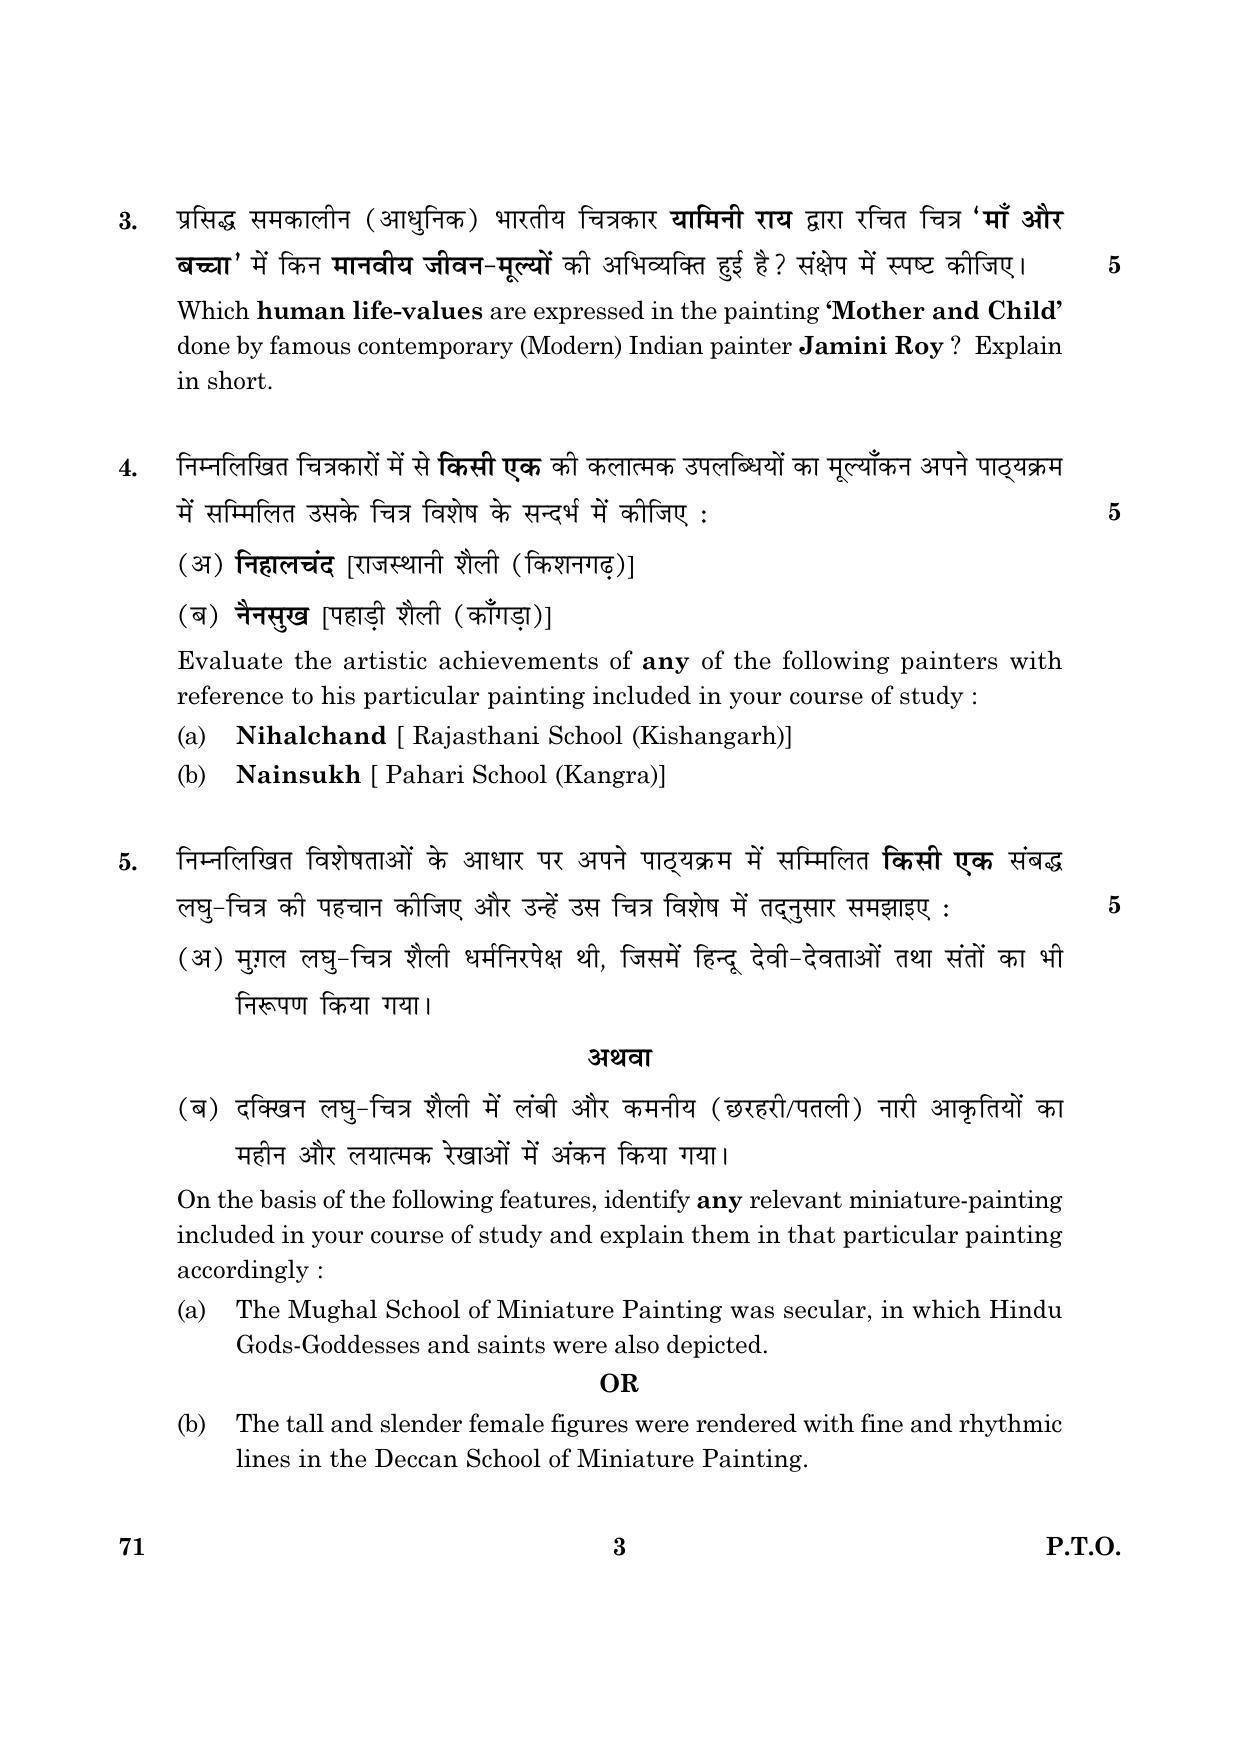 CBSE Class 12 071 Painting (Theory) 2016 Question Paper - Page 3